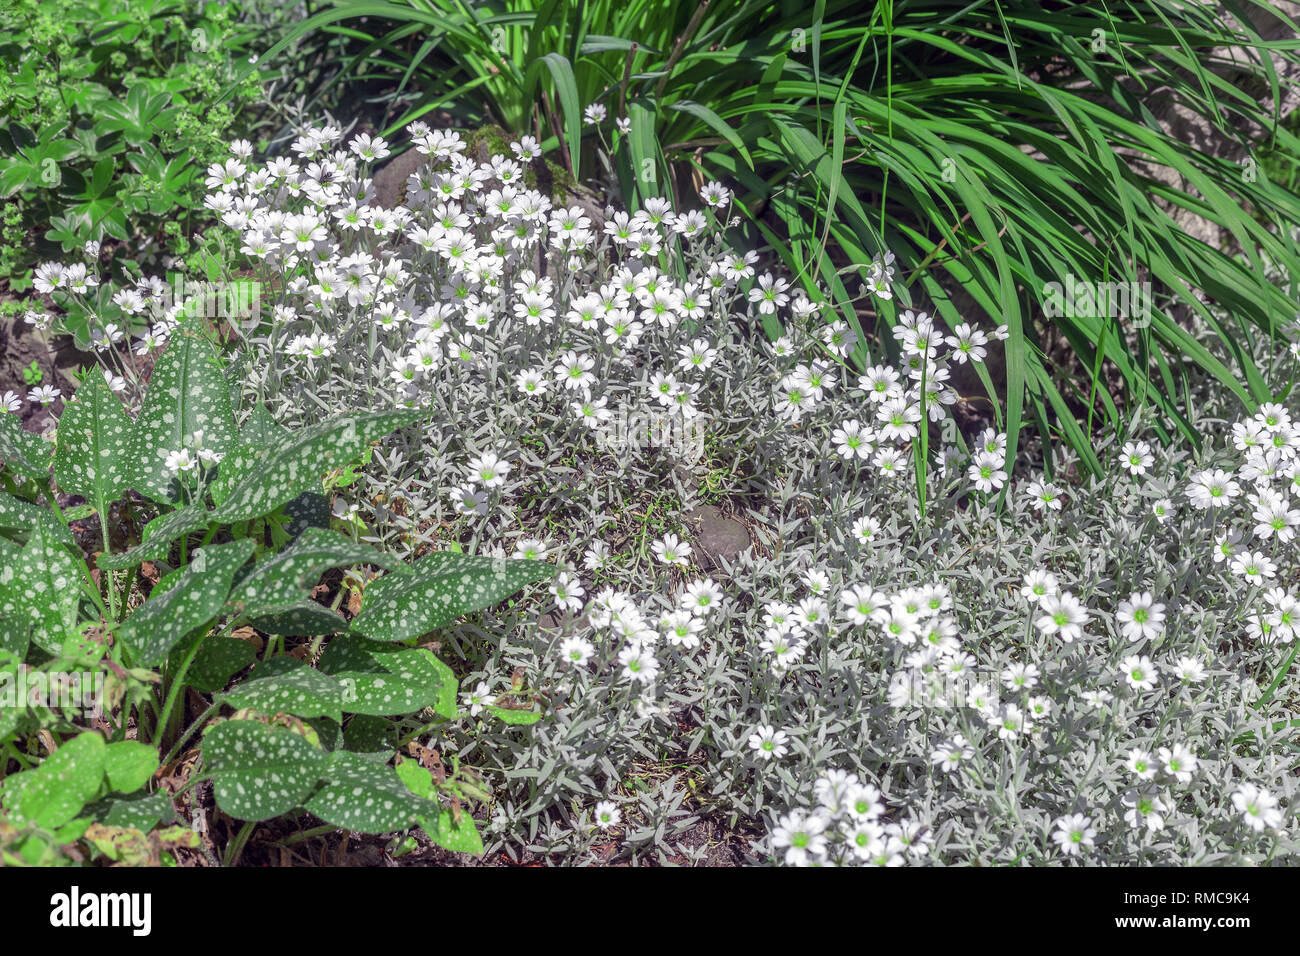 Cerastium Small White Flowers Mouse Ear Chickweed Flowering Plant In Spring Garden Stock Photo Alamy